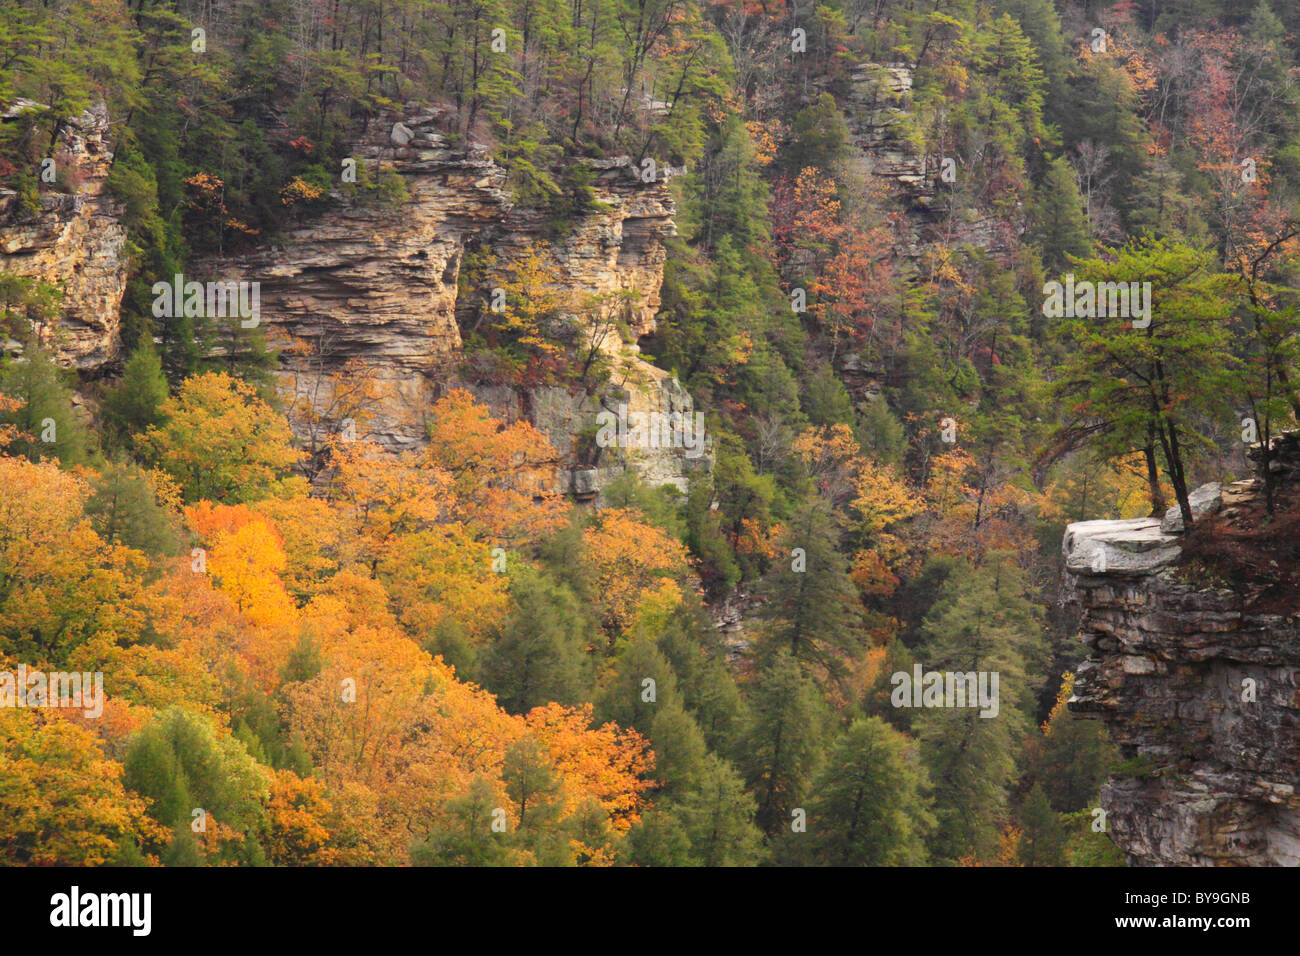 Cane Creek Canyon, Herbst Creek Falls State Park Resort, Pikeville, Tennessee, USA Stockfoto